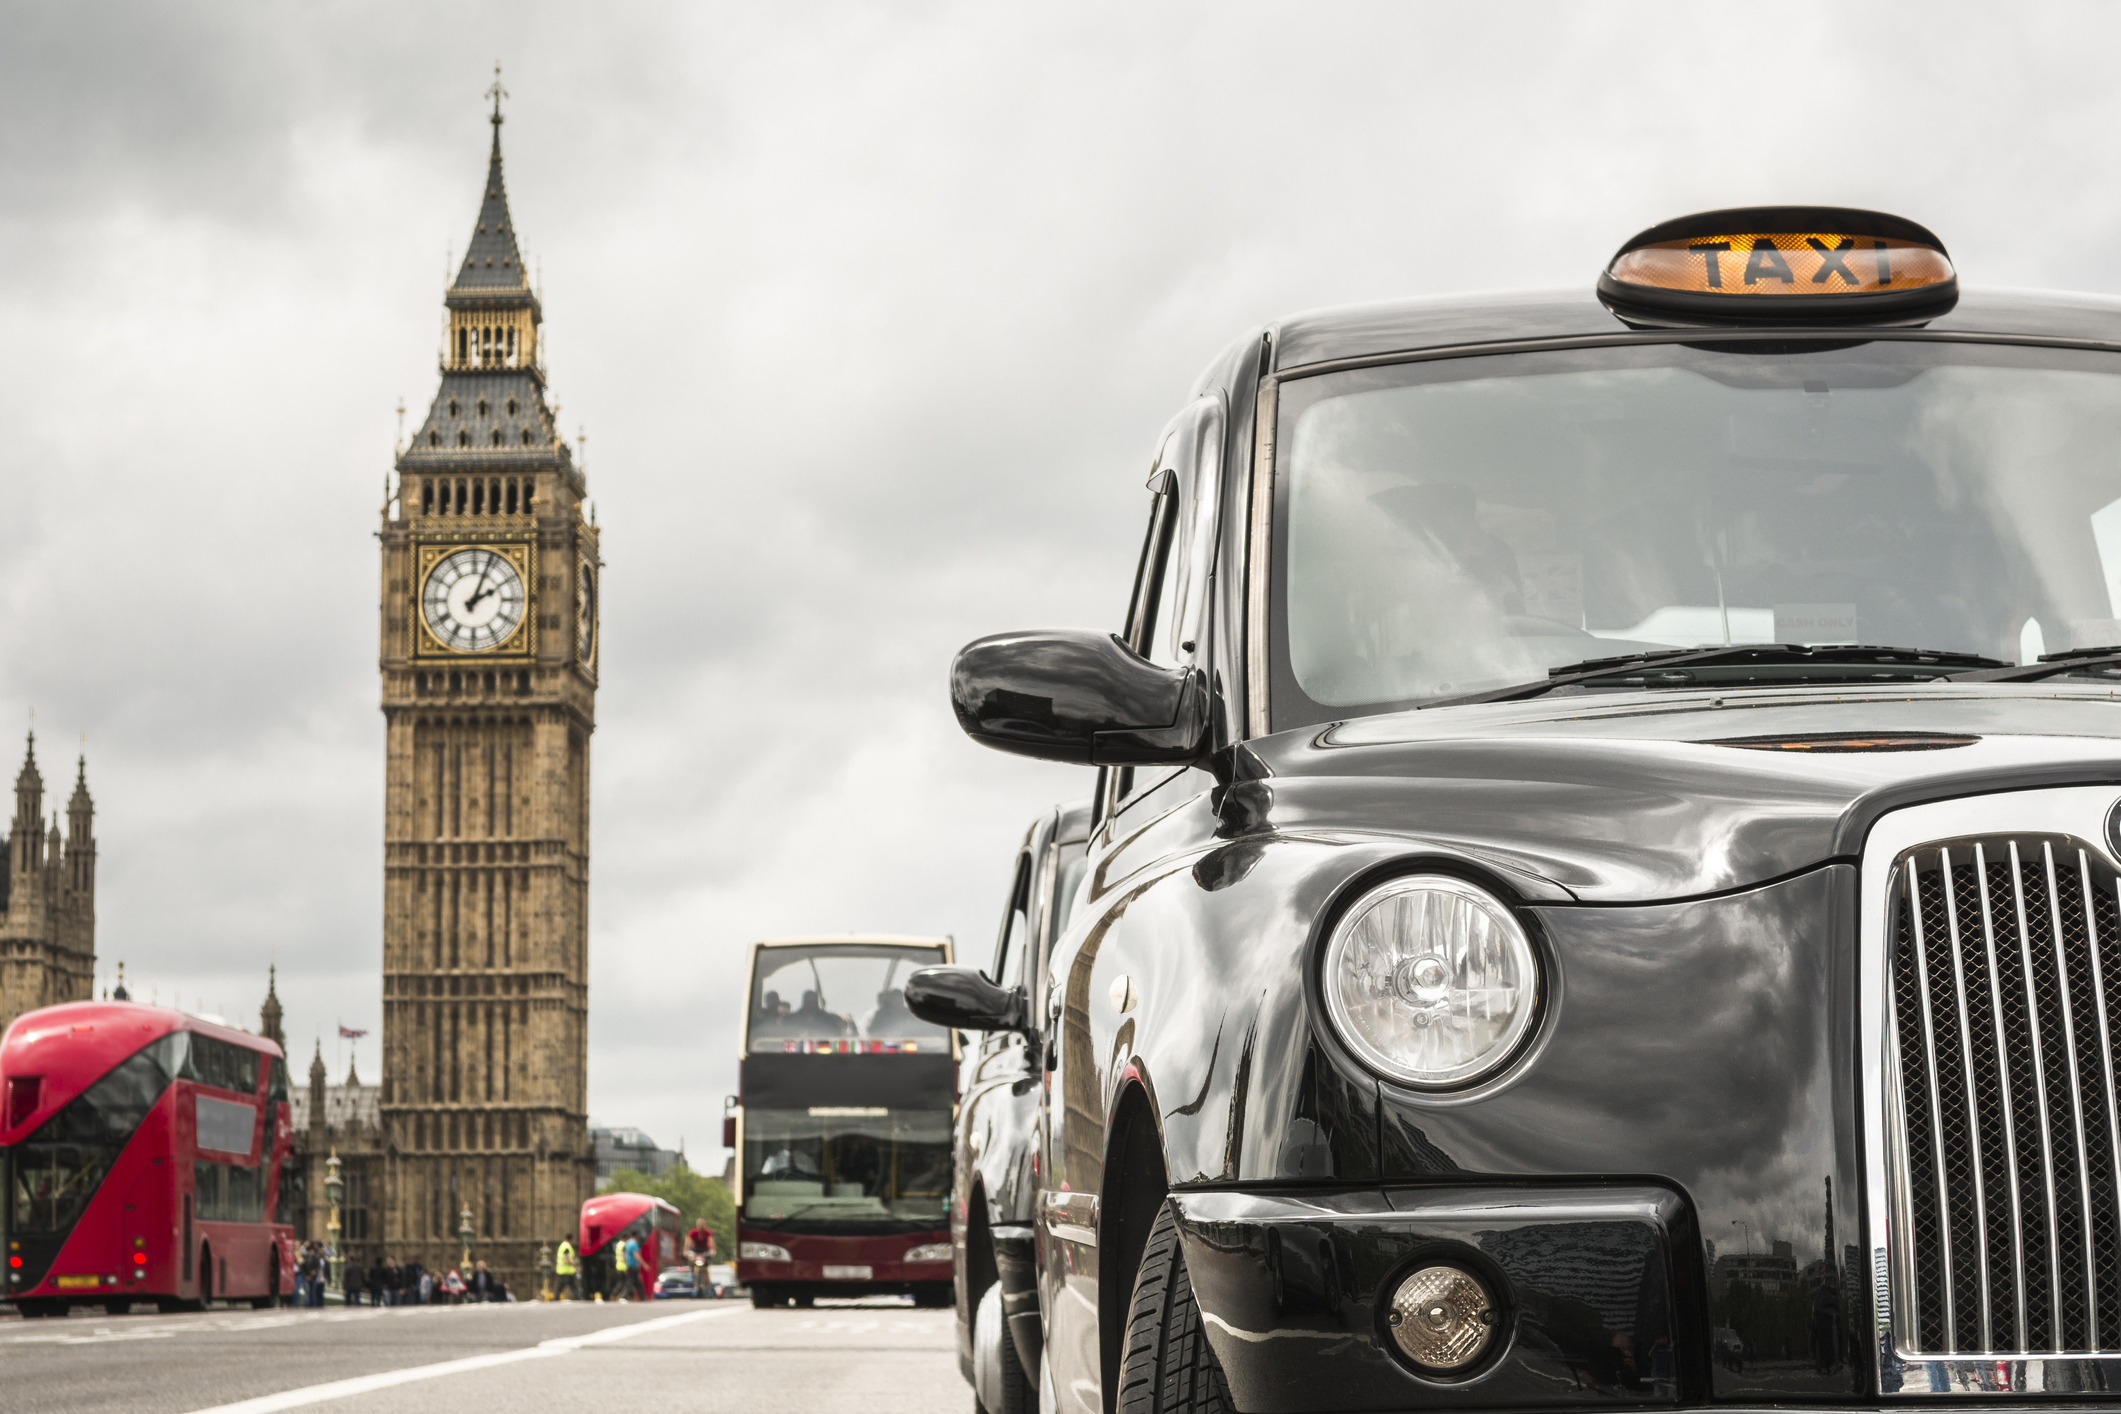 Hackney carriage - transport in London